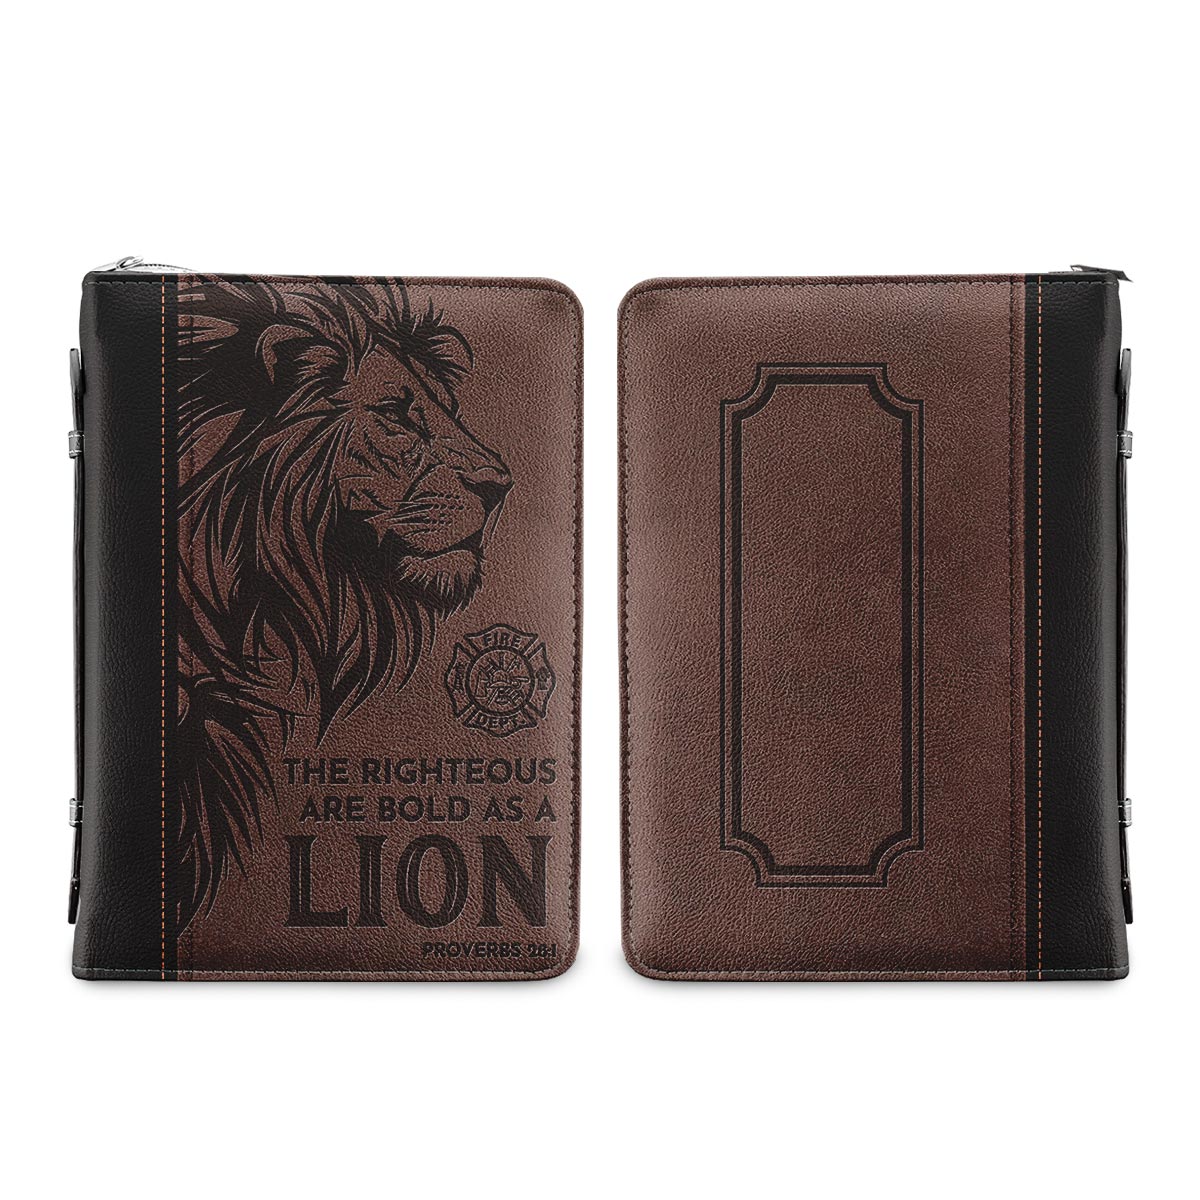 Firefighter The Righteous Are Bold As A Lion Proverbs 281 Personalized Bible Covers - Custom Bible Case Christian Pastor